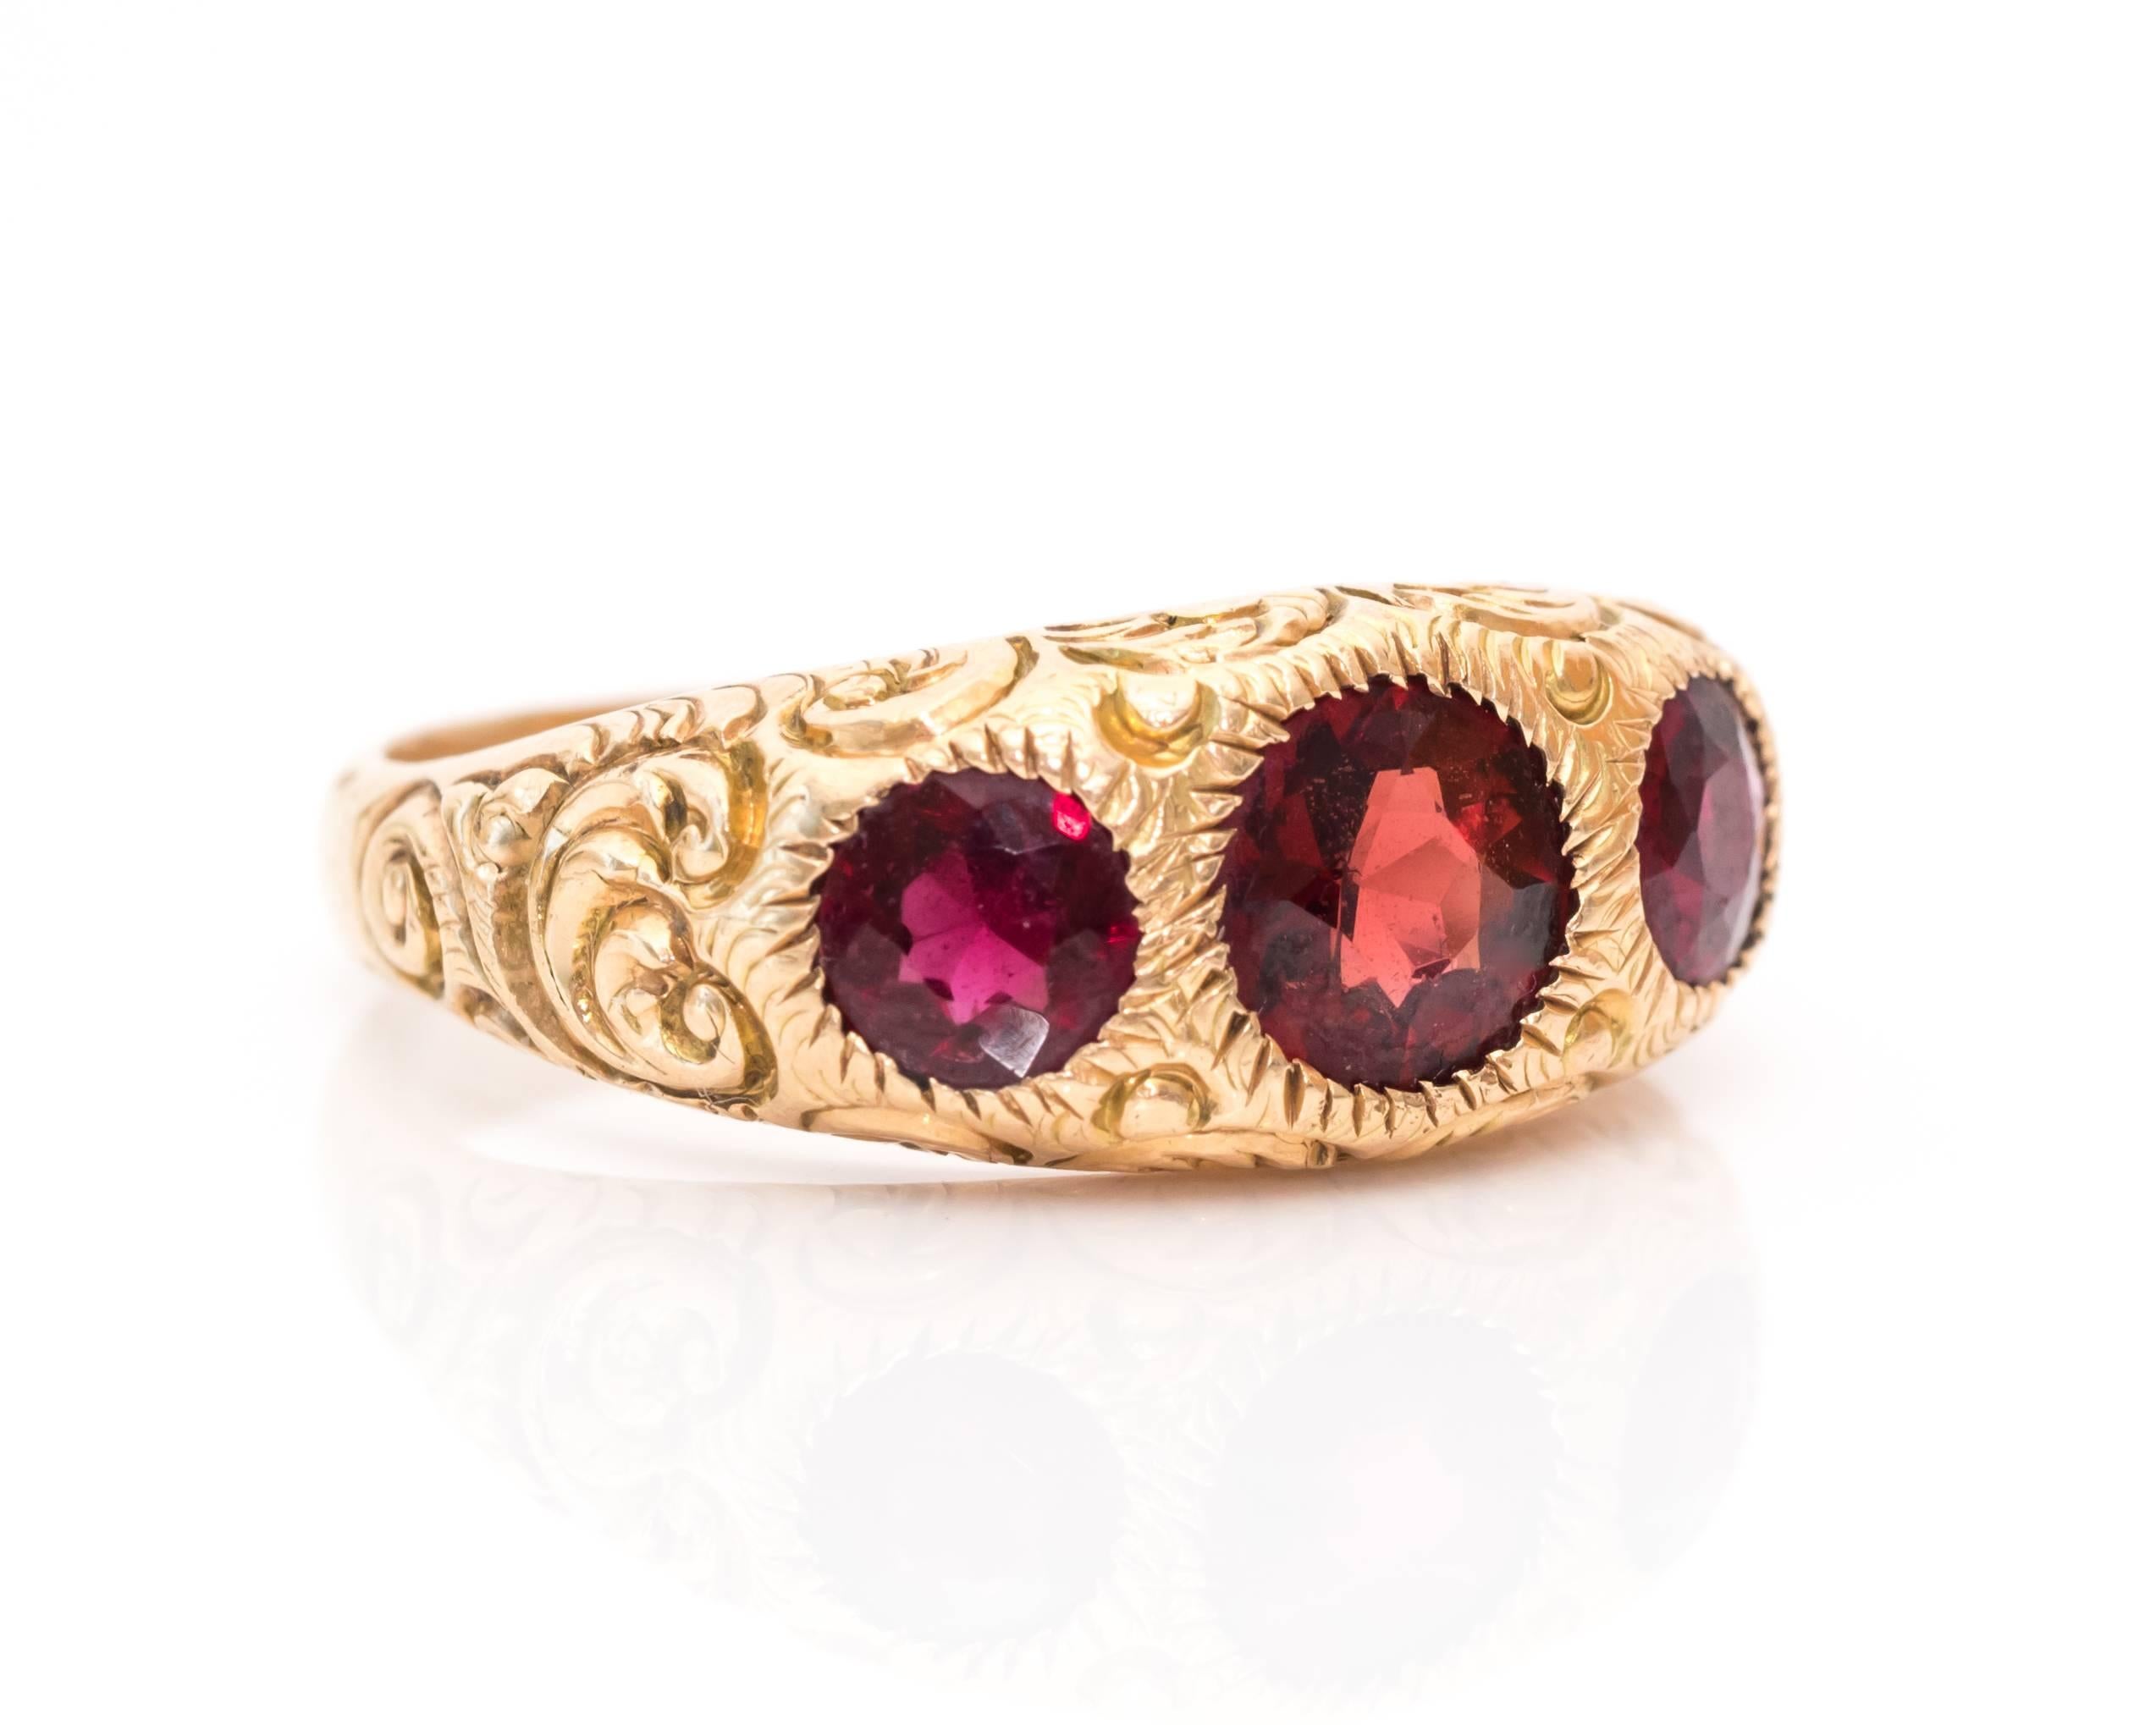 This ring is beaming with beautiful shine and color!
The ring is most likely made of garnets, but we cannot test the gemstones due to the mounting. The center stone is slightly larger than the two round stones bordering it on each shoulder. Each is